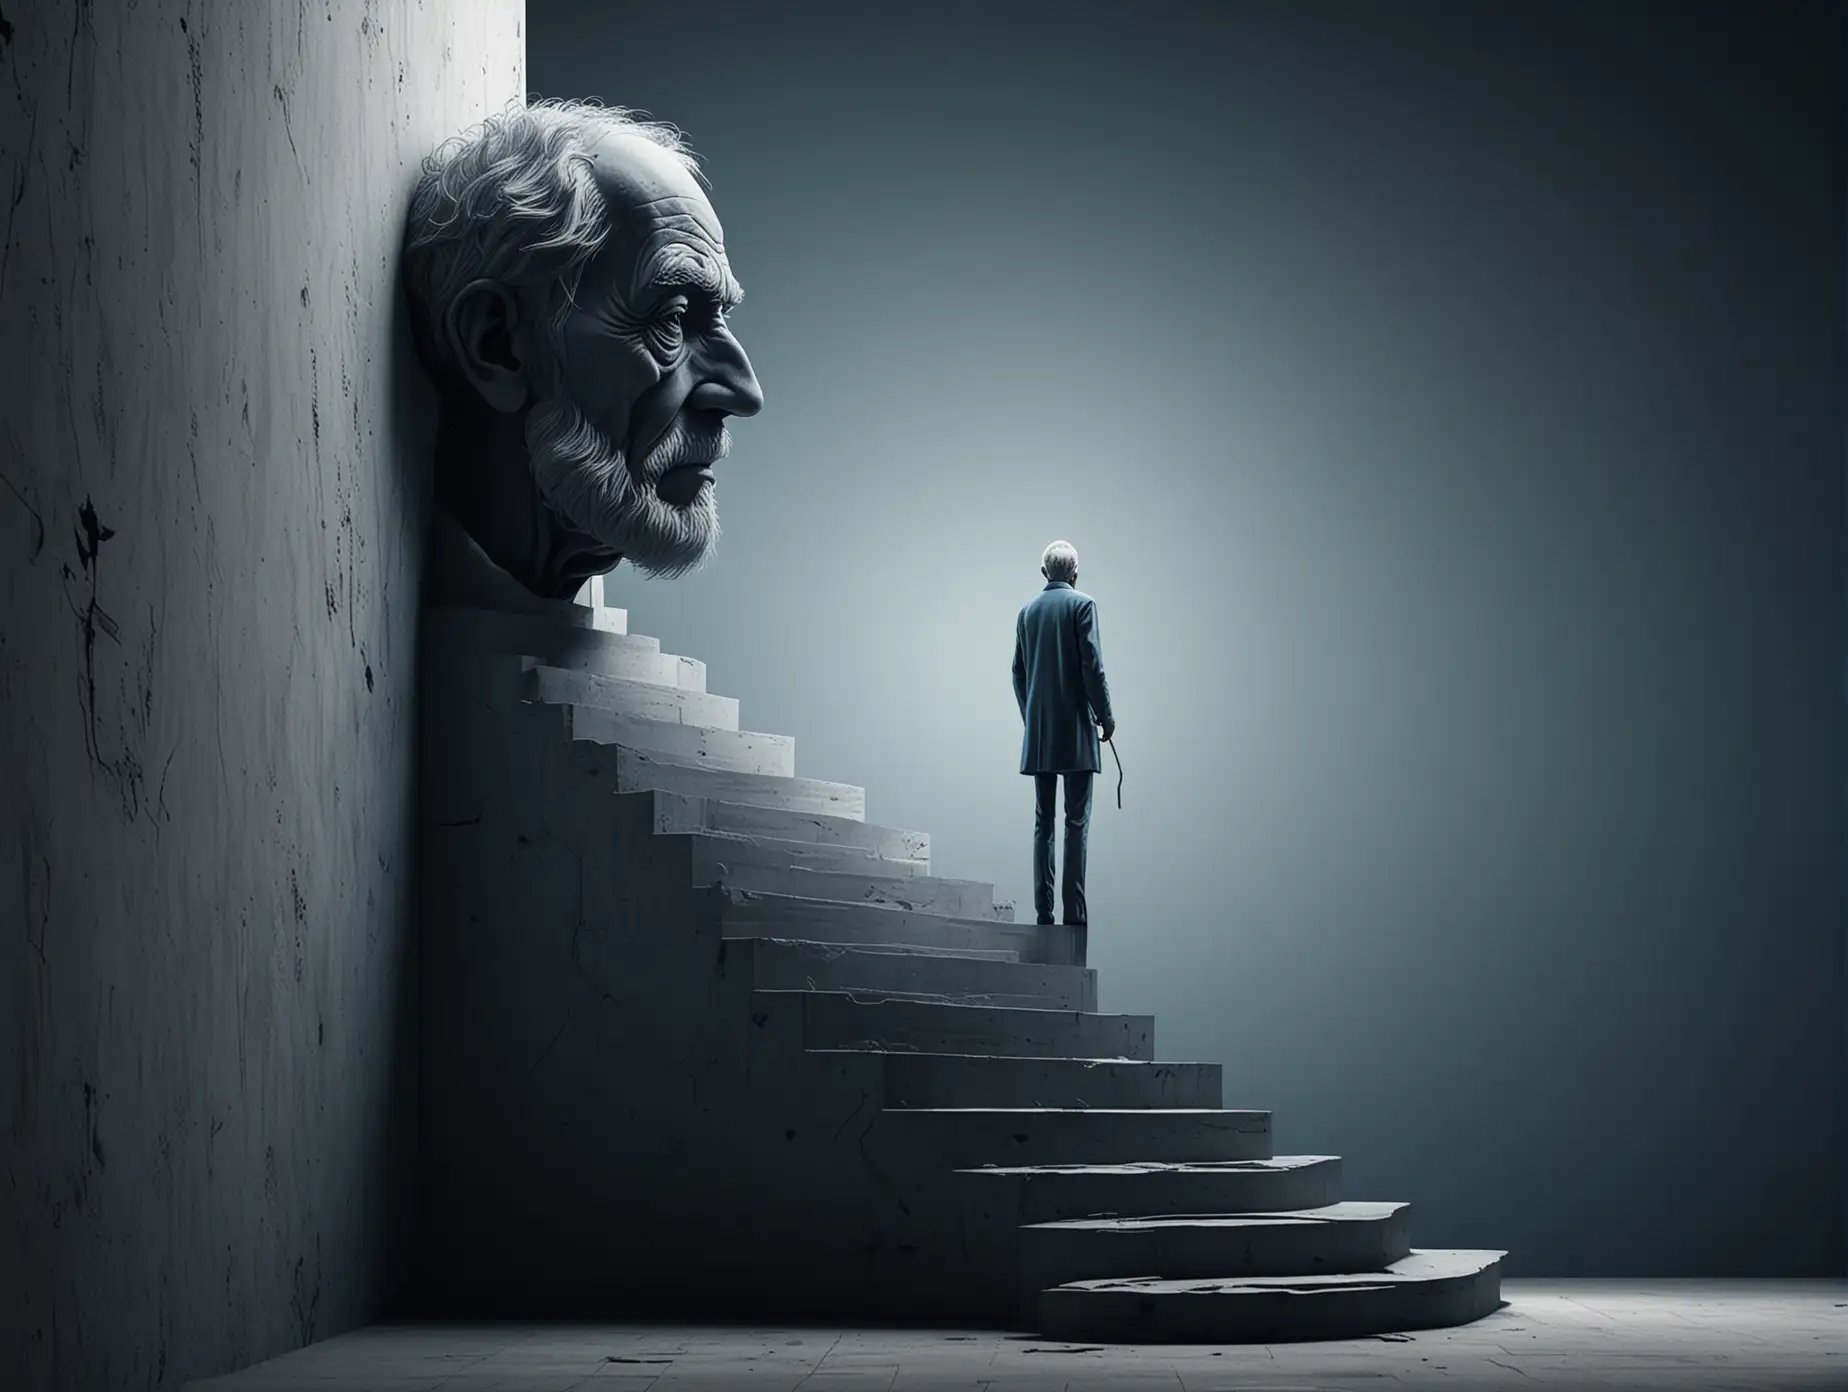 Create a digital artwork featuring a sculptural silhouette of an old man’s head with an open mind revealing stairs inside. A lone figure is seen ascending the stairs, symbolizing personal growth. The scene is set against a stark black background with minimalistic design elements. Illuminate the piece with a blue-white gradient lighting for a surreal effect. Ensure the artwork is in sharp focus, with a surreal, ethereal atmosphere.